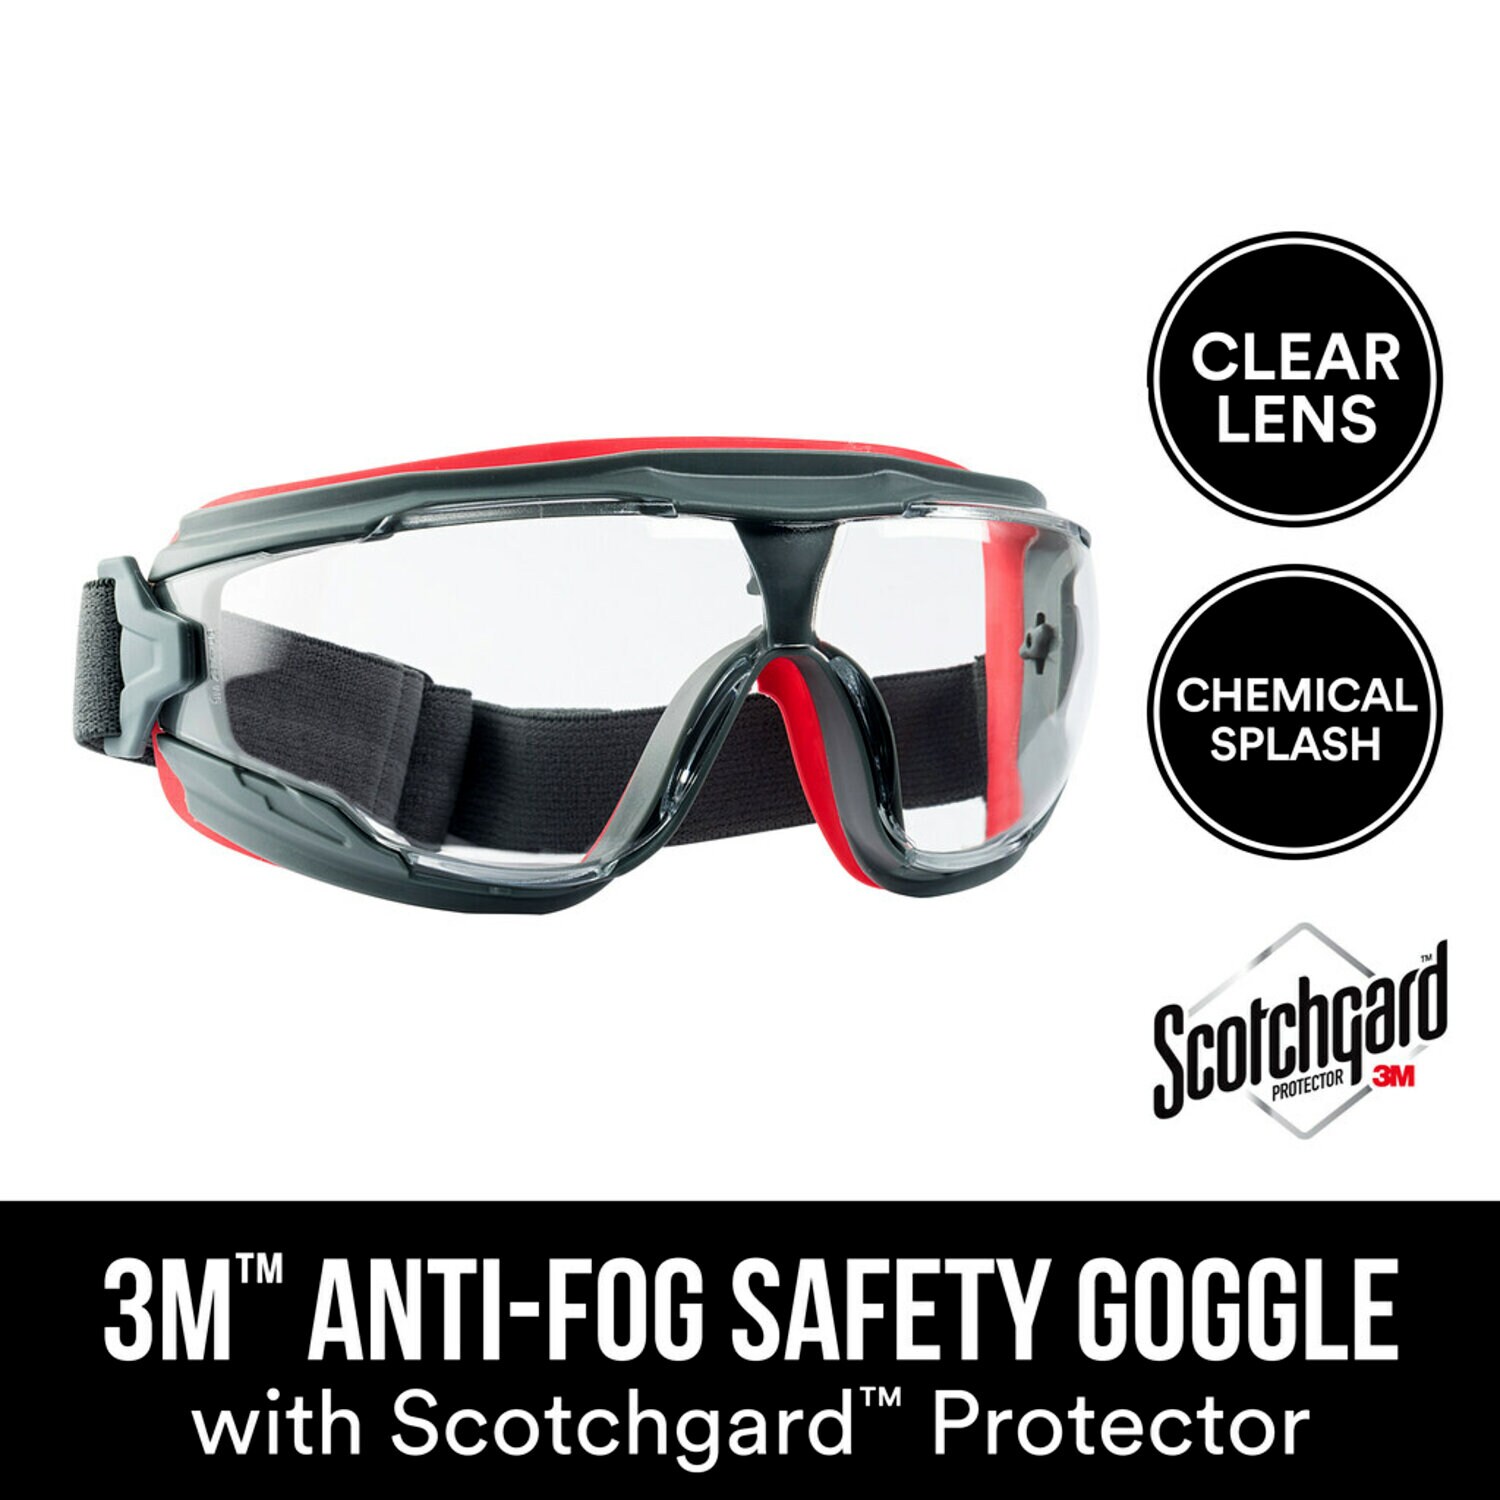 7100199315 - 3M Anti-Fog Goggle with Scotchgard Protector 47212H1-VDC, Gray/Red,
Clear Lens, 5/cs